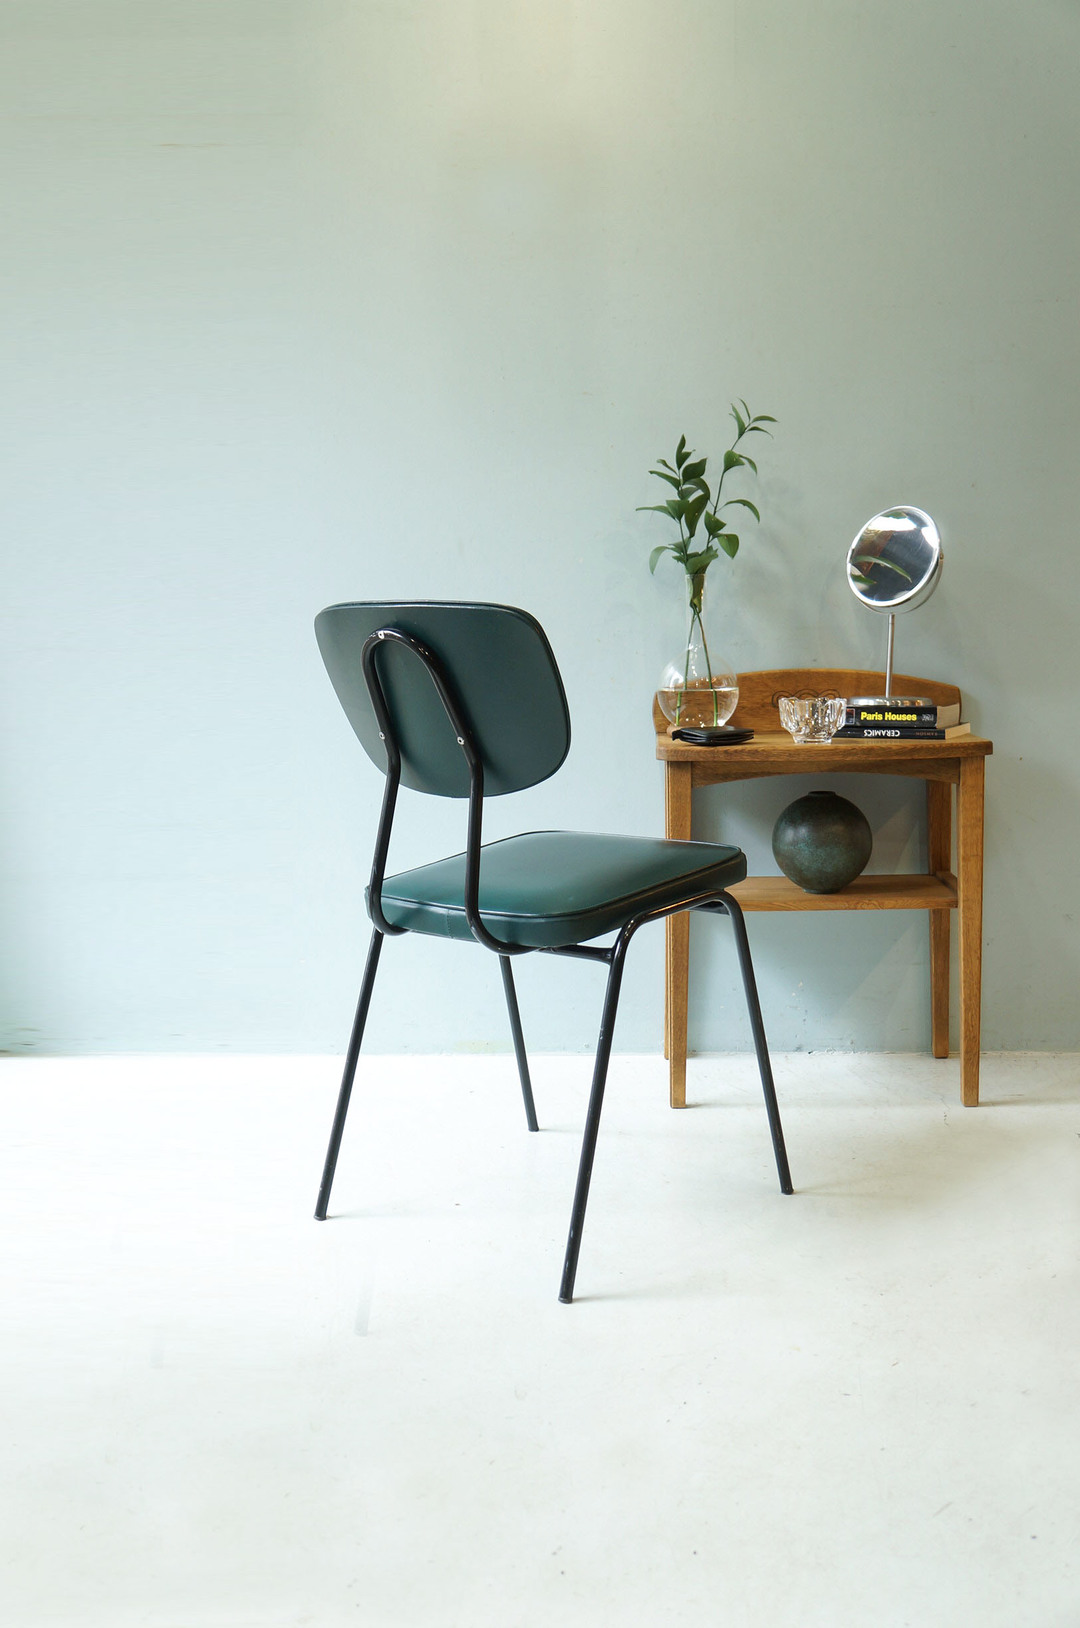 Dutch Vintage Dining Chair Steel Pipe x Vinyl Leather/オランダヴィンテージ ダイニングチェア スチール ビニールレザー 椅子 インダストリアル